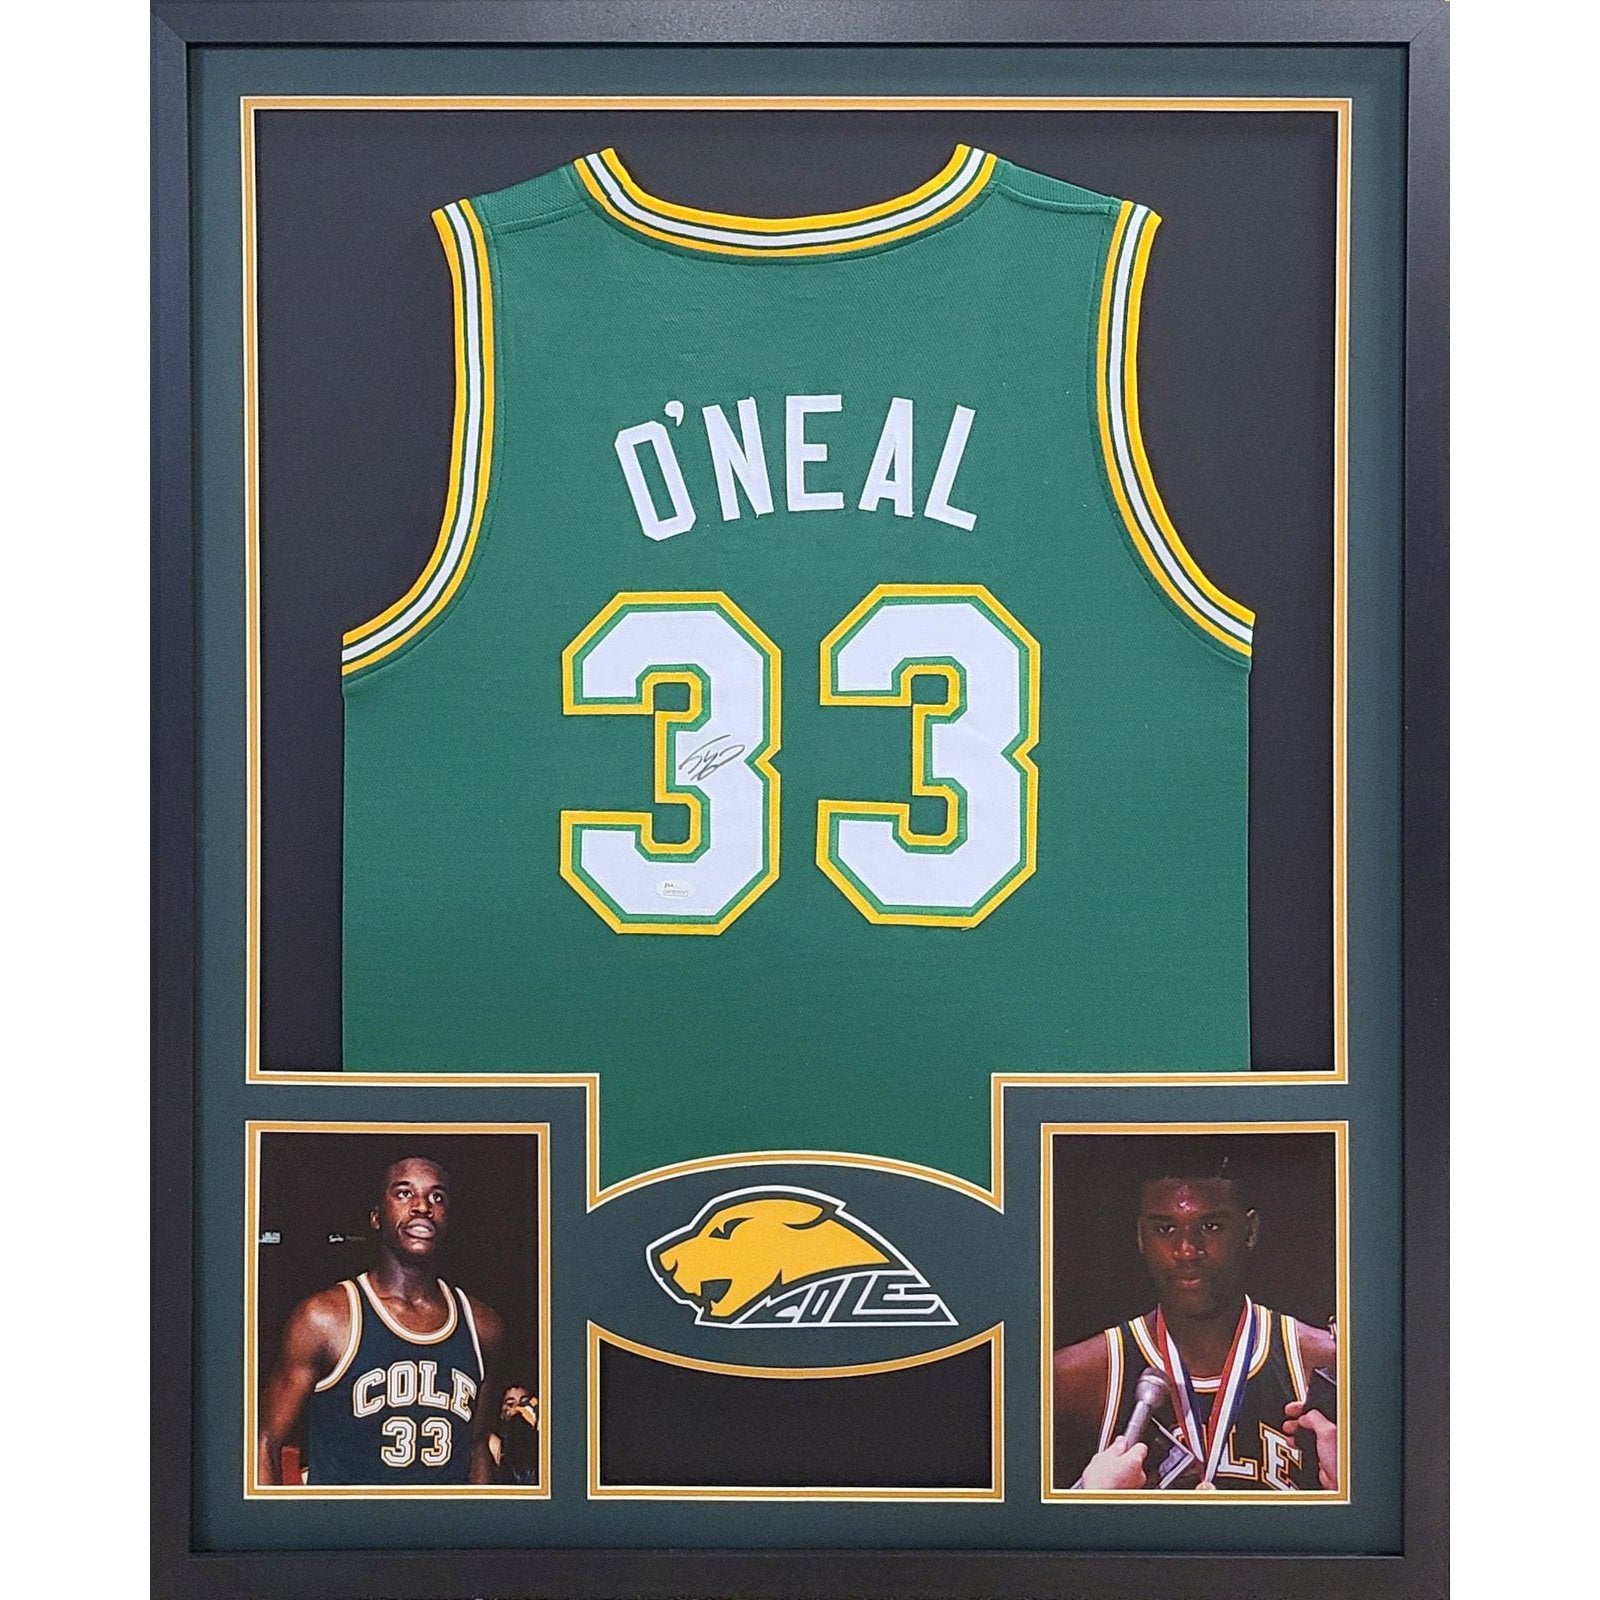 Shaquille O'Neal Signed Framed Jersey JSA Autographed Cole High School Shaq